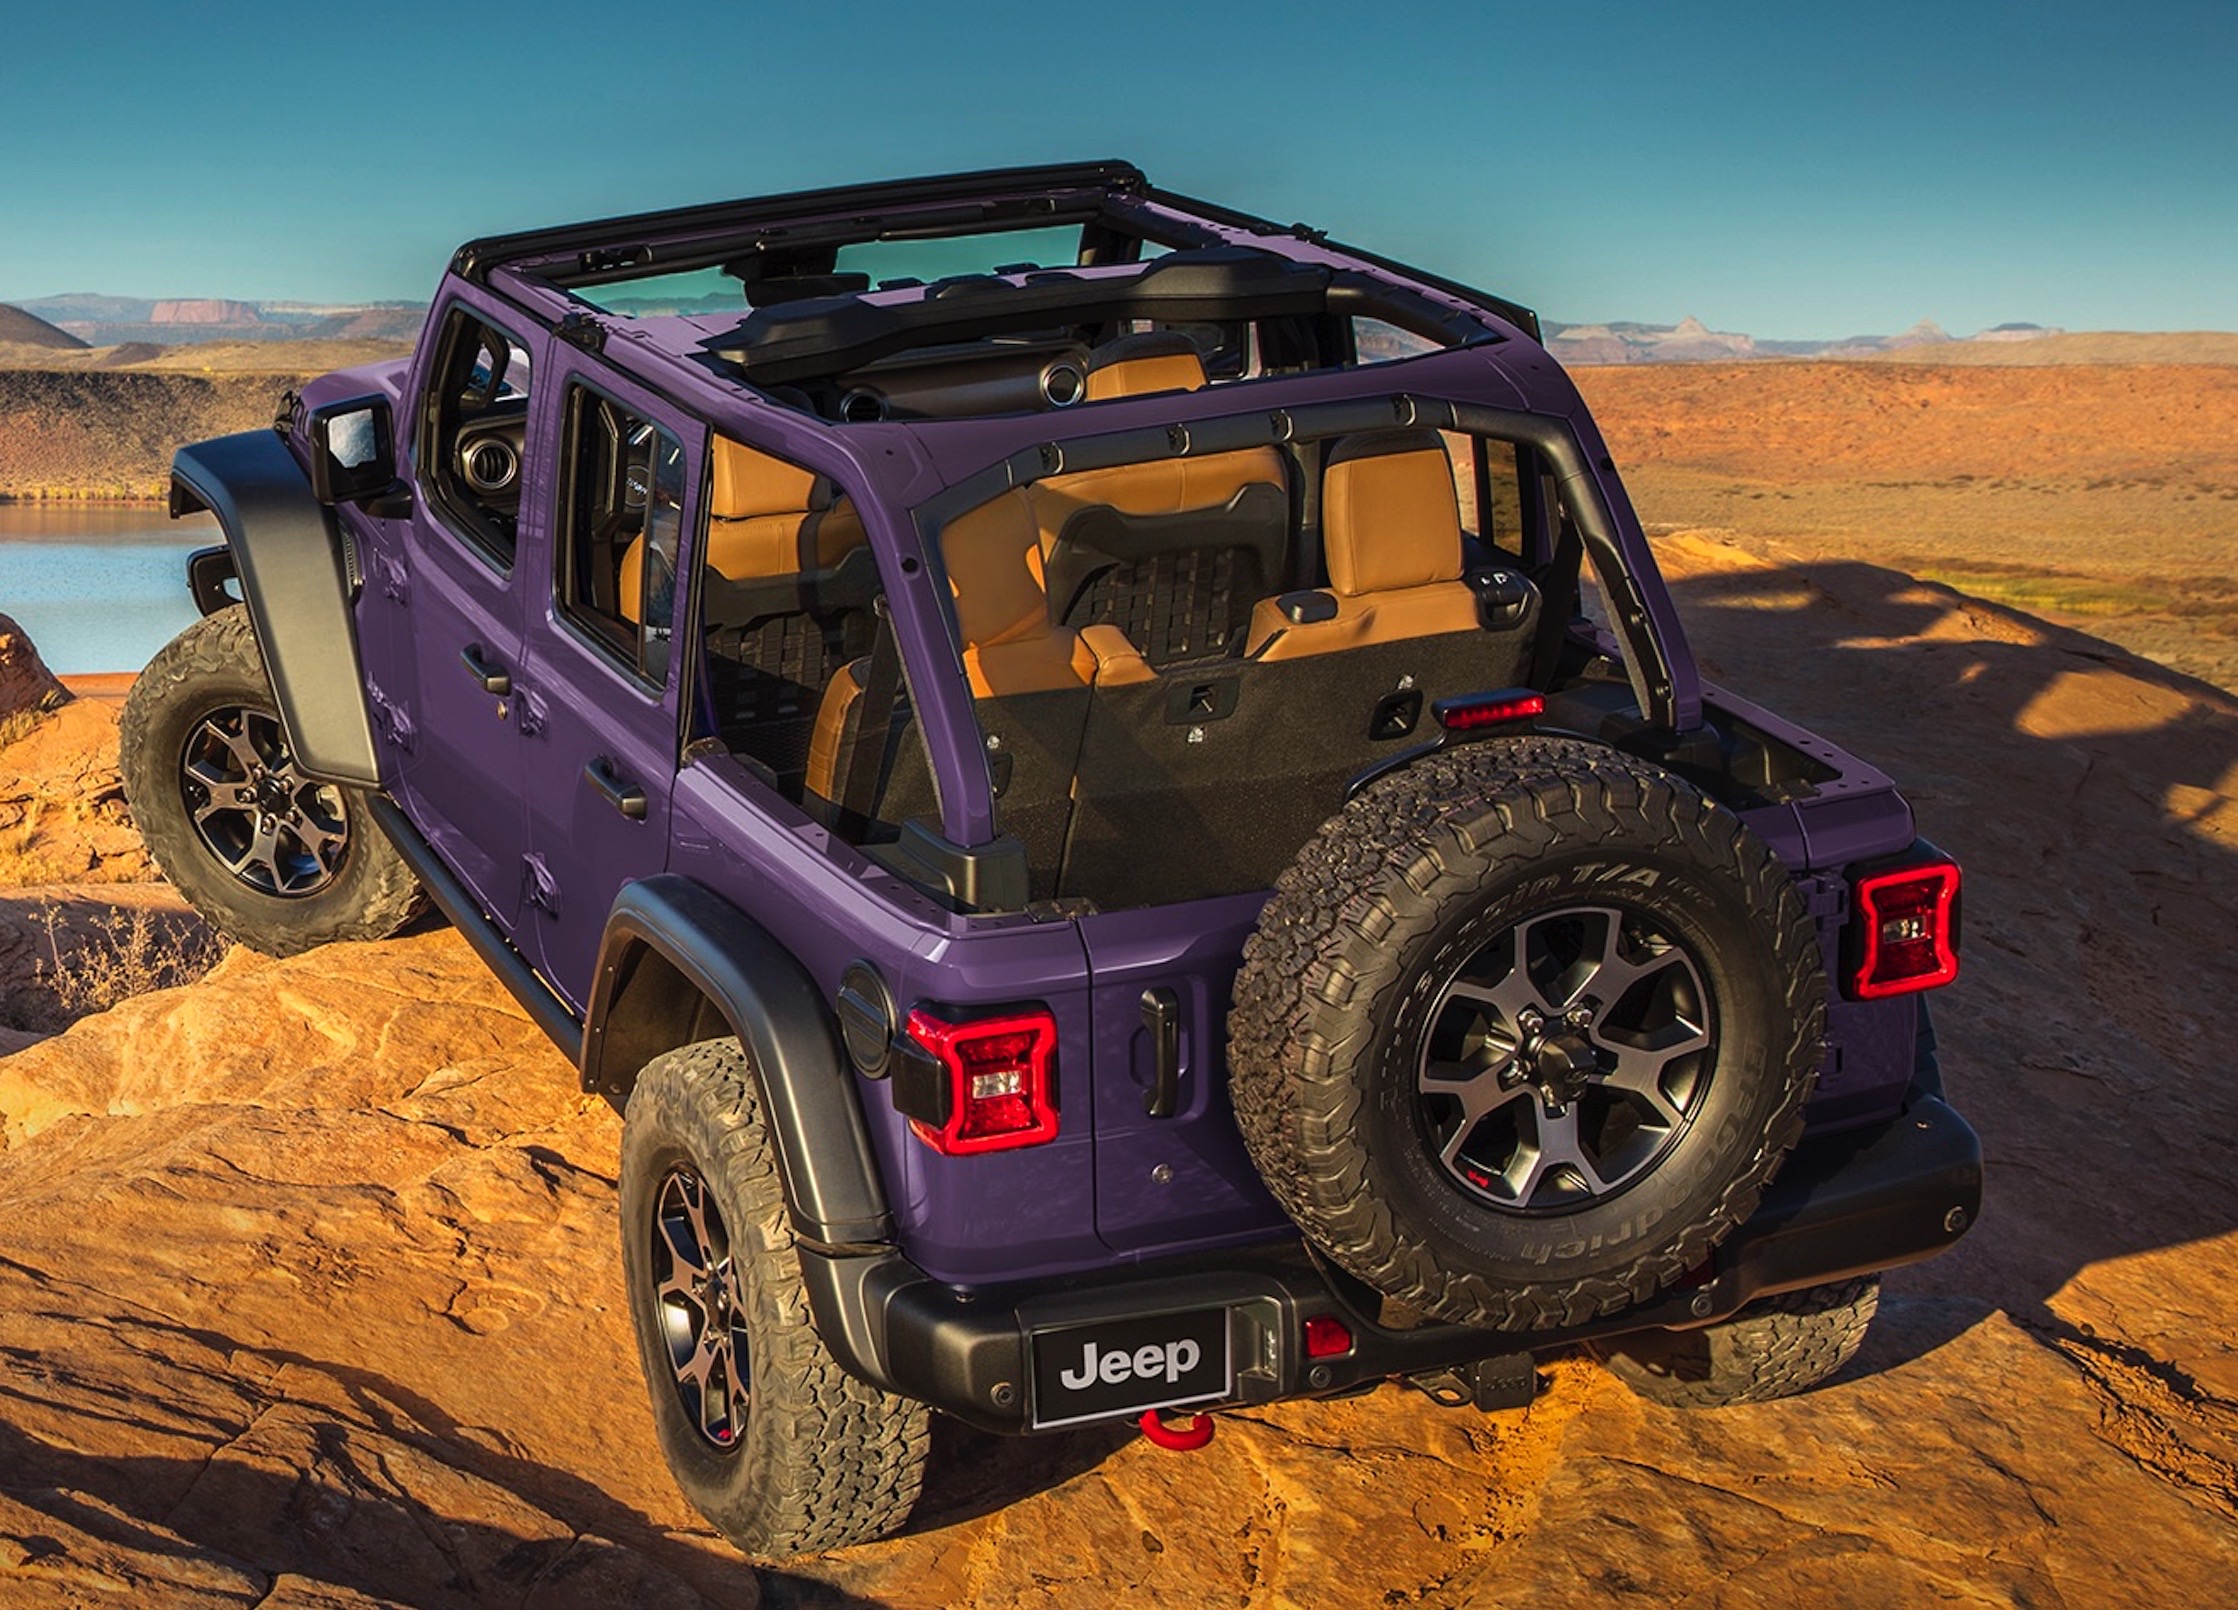 MY NAME IS EARL And Purple REIGN. 2023 Jeep Wrangler Adds TWO New Colors To  The Mix. - AutoSpies Auto News